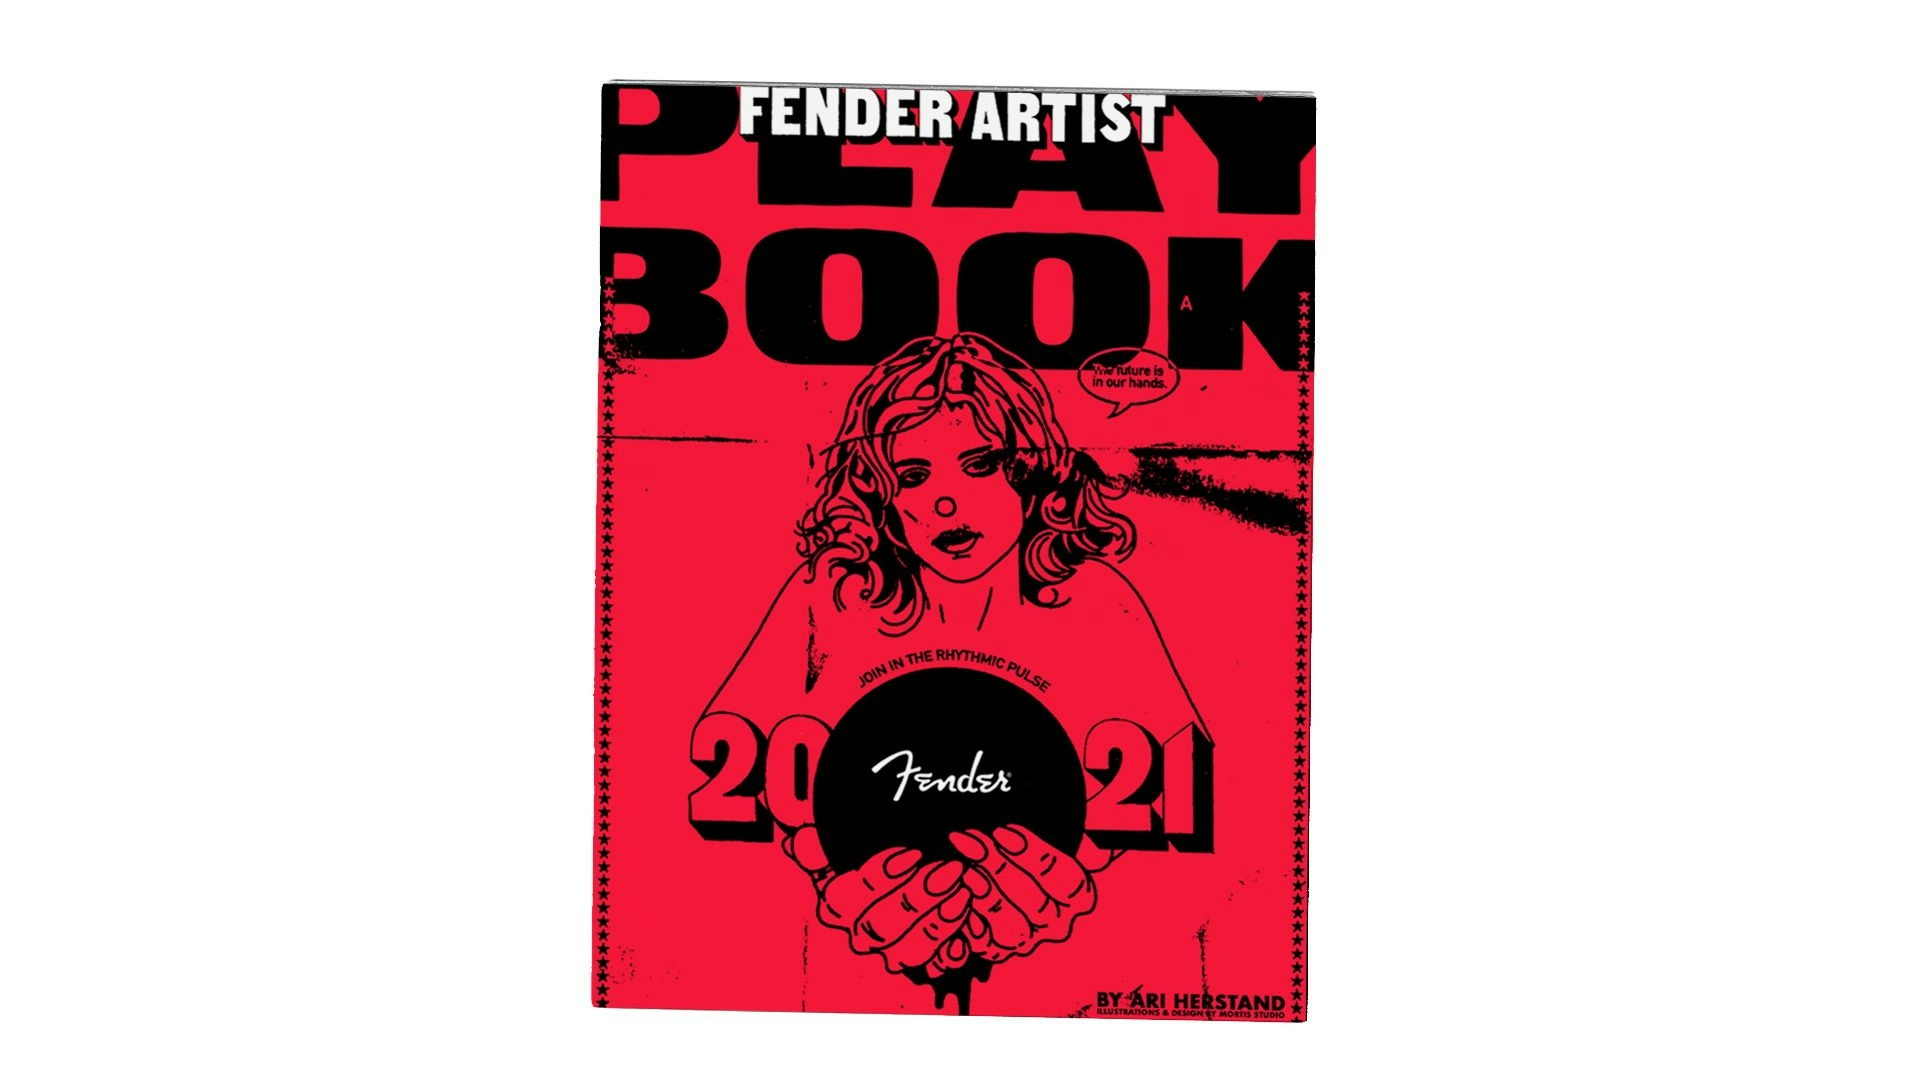 Fender Next Artist Play Book 2021 editorial cover in red